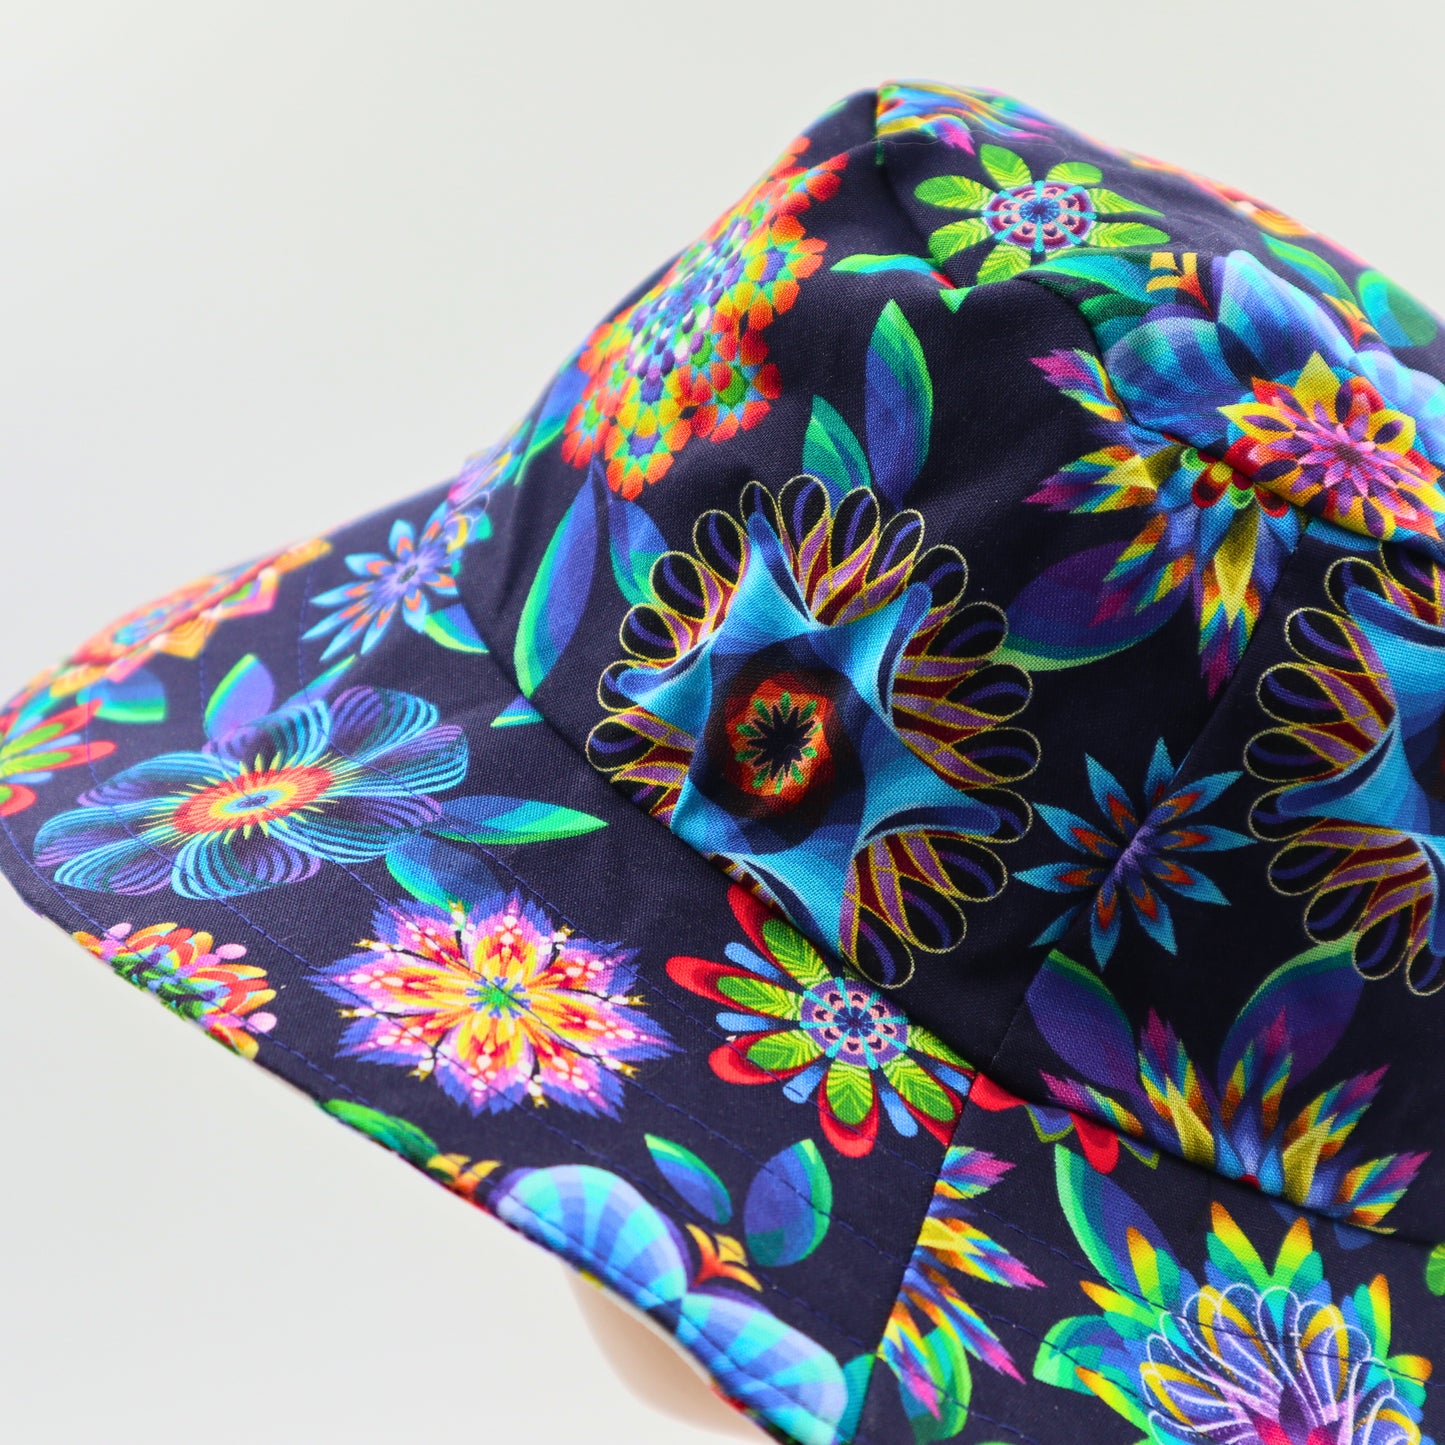 Reversible Sun Hat - Ladies & Girls sizes - psychedelic flowers